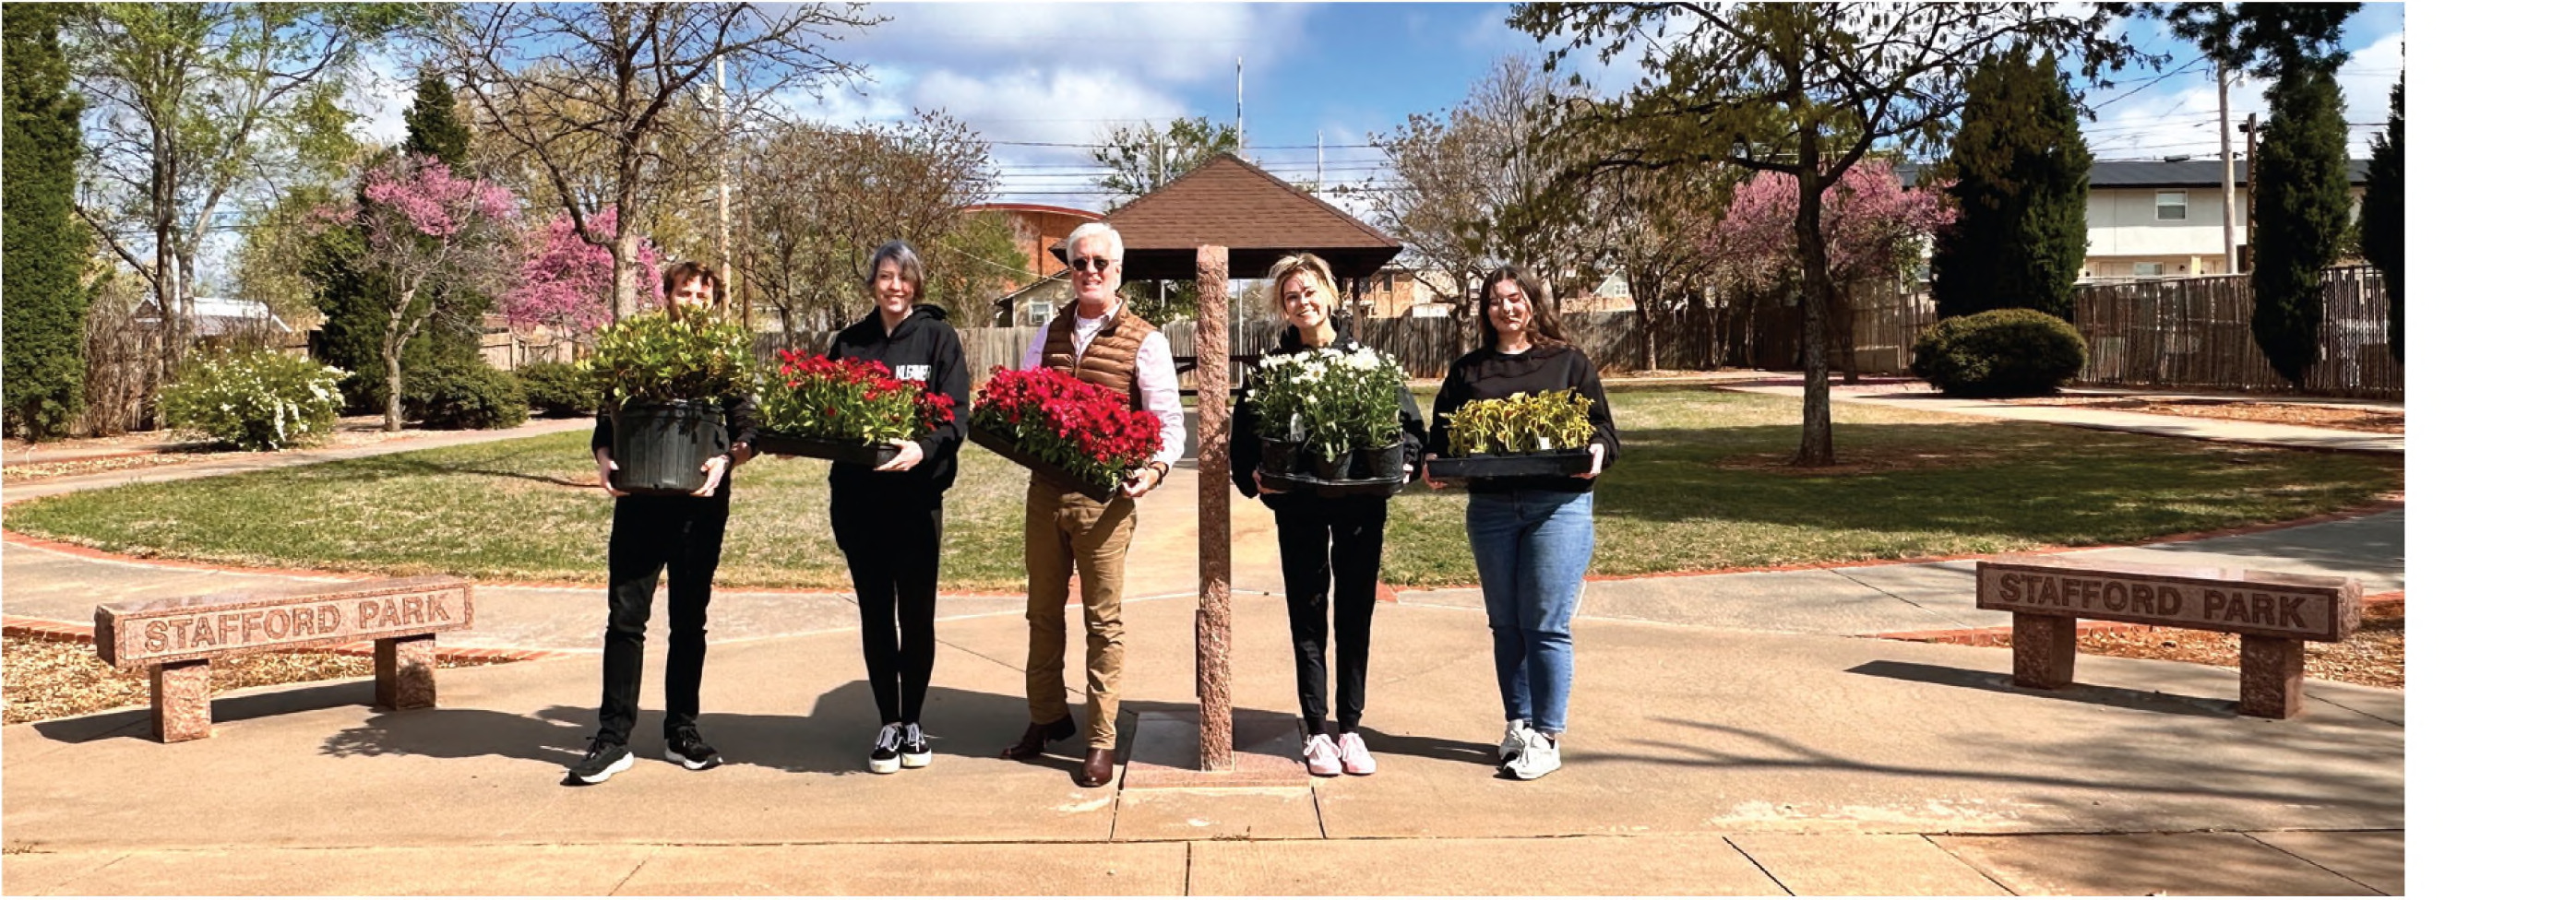 ► The Weatherford Daily News staff plants flowers at Stafford Park as a salute to the late Lt. Gen. Thomas P. Stafford in preparation for the funeral Friday. Pictured are John Cook, far left, Sarah Cook, WDN Publisher Phillip Reid, Camryn Henderson and Kyra Huckabay.